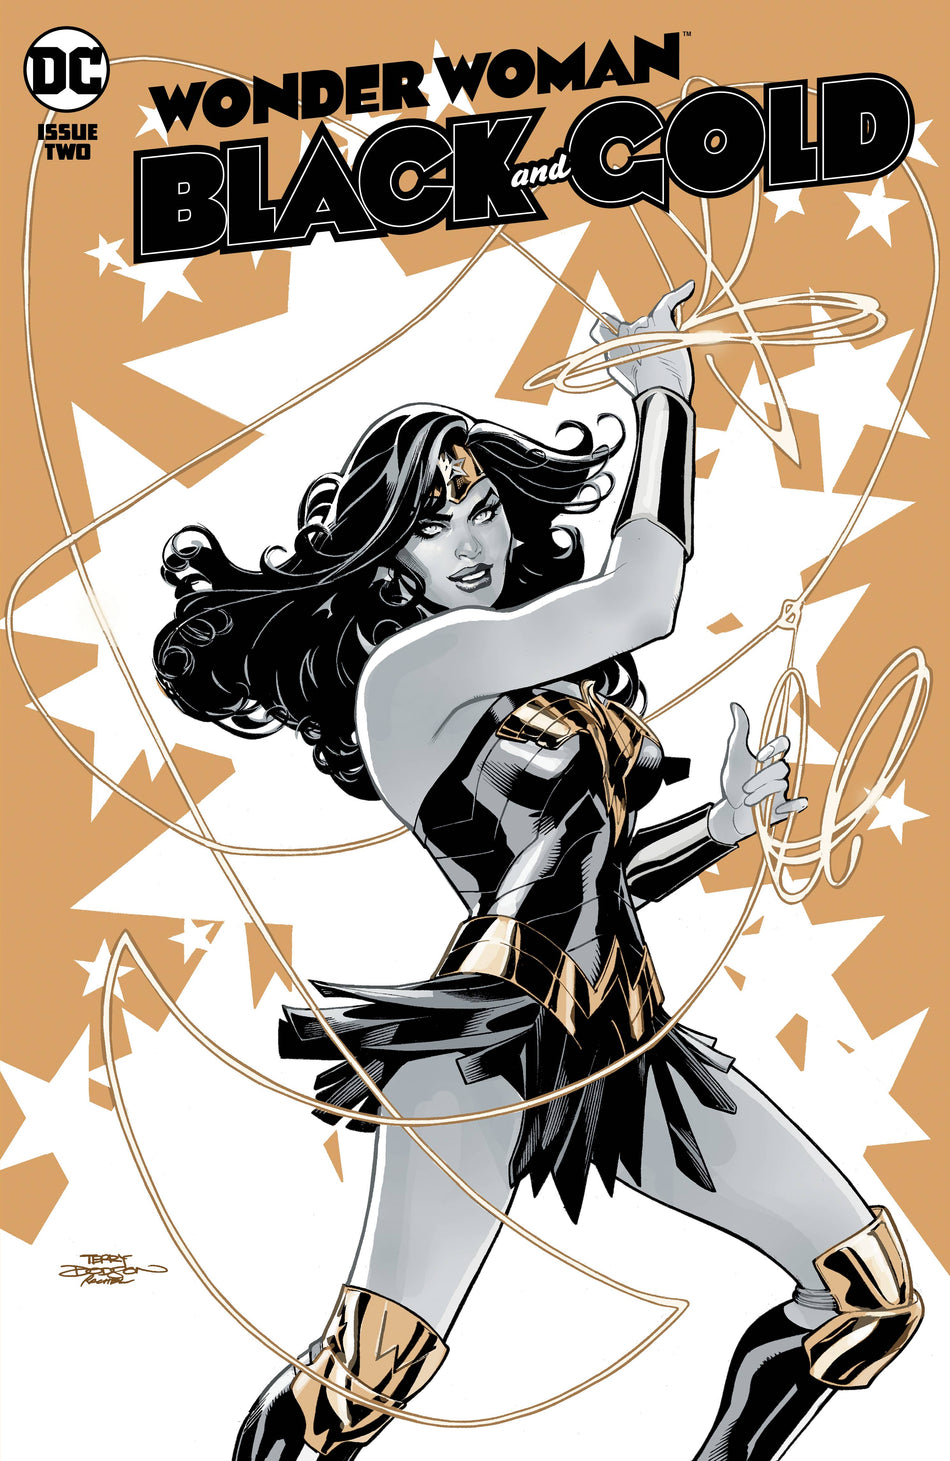 Photo of Wonder Woman Black & Gold Issue 2 CVR A Dodson comic sold by Stronghold Collectibles